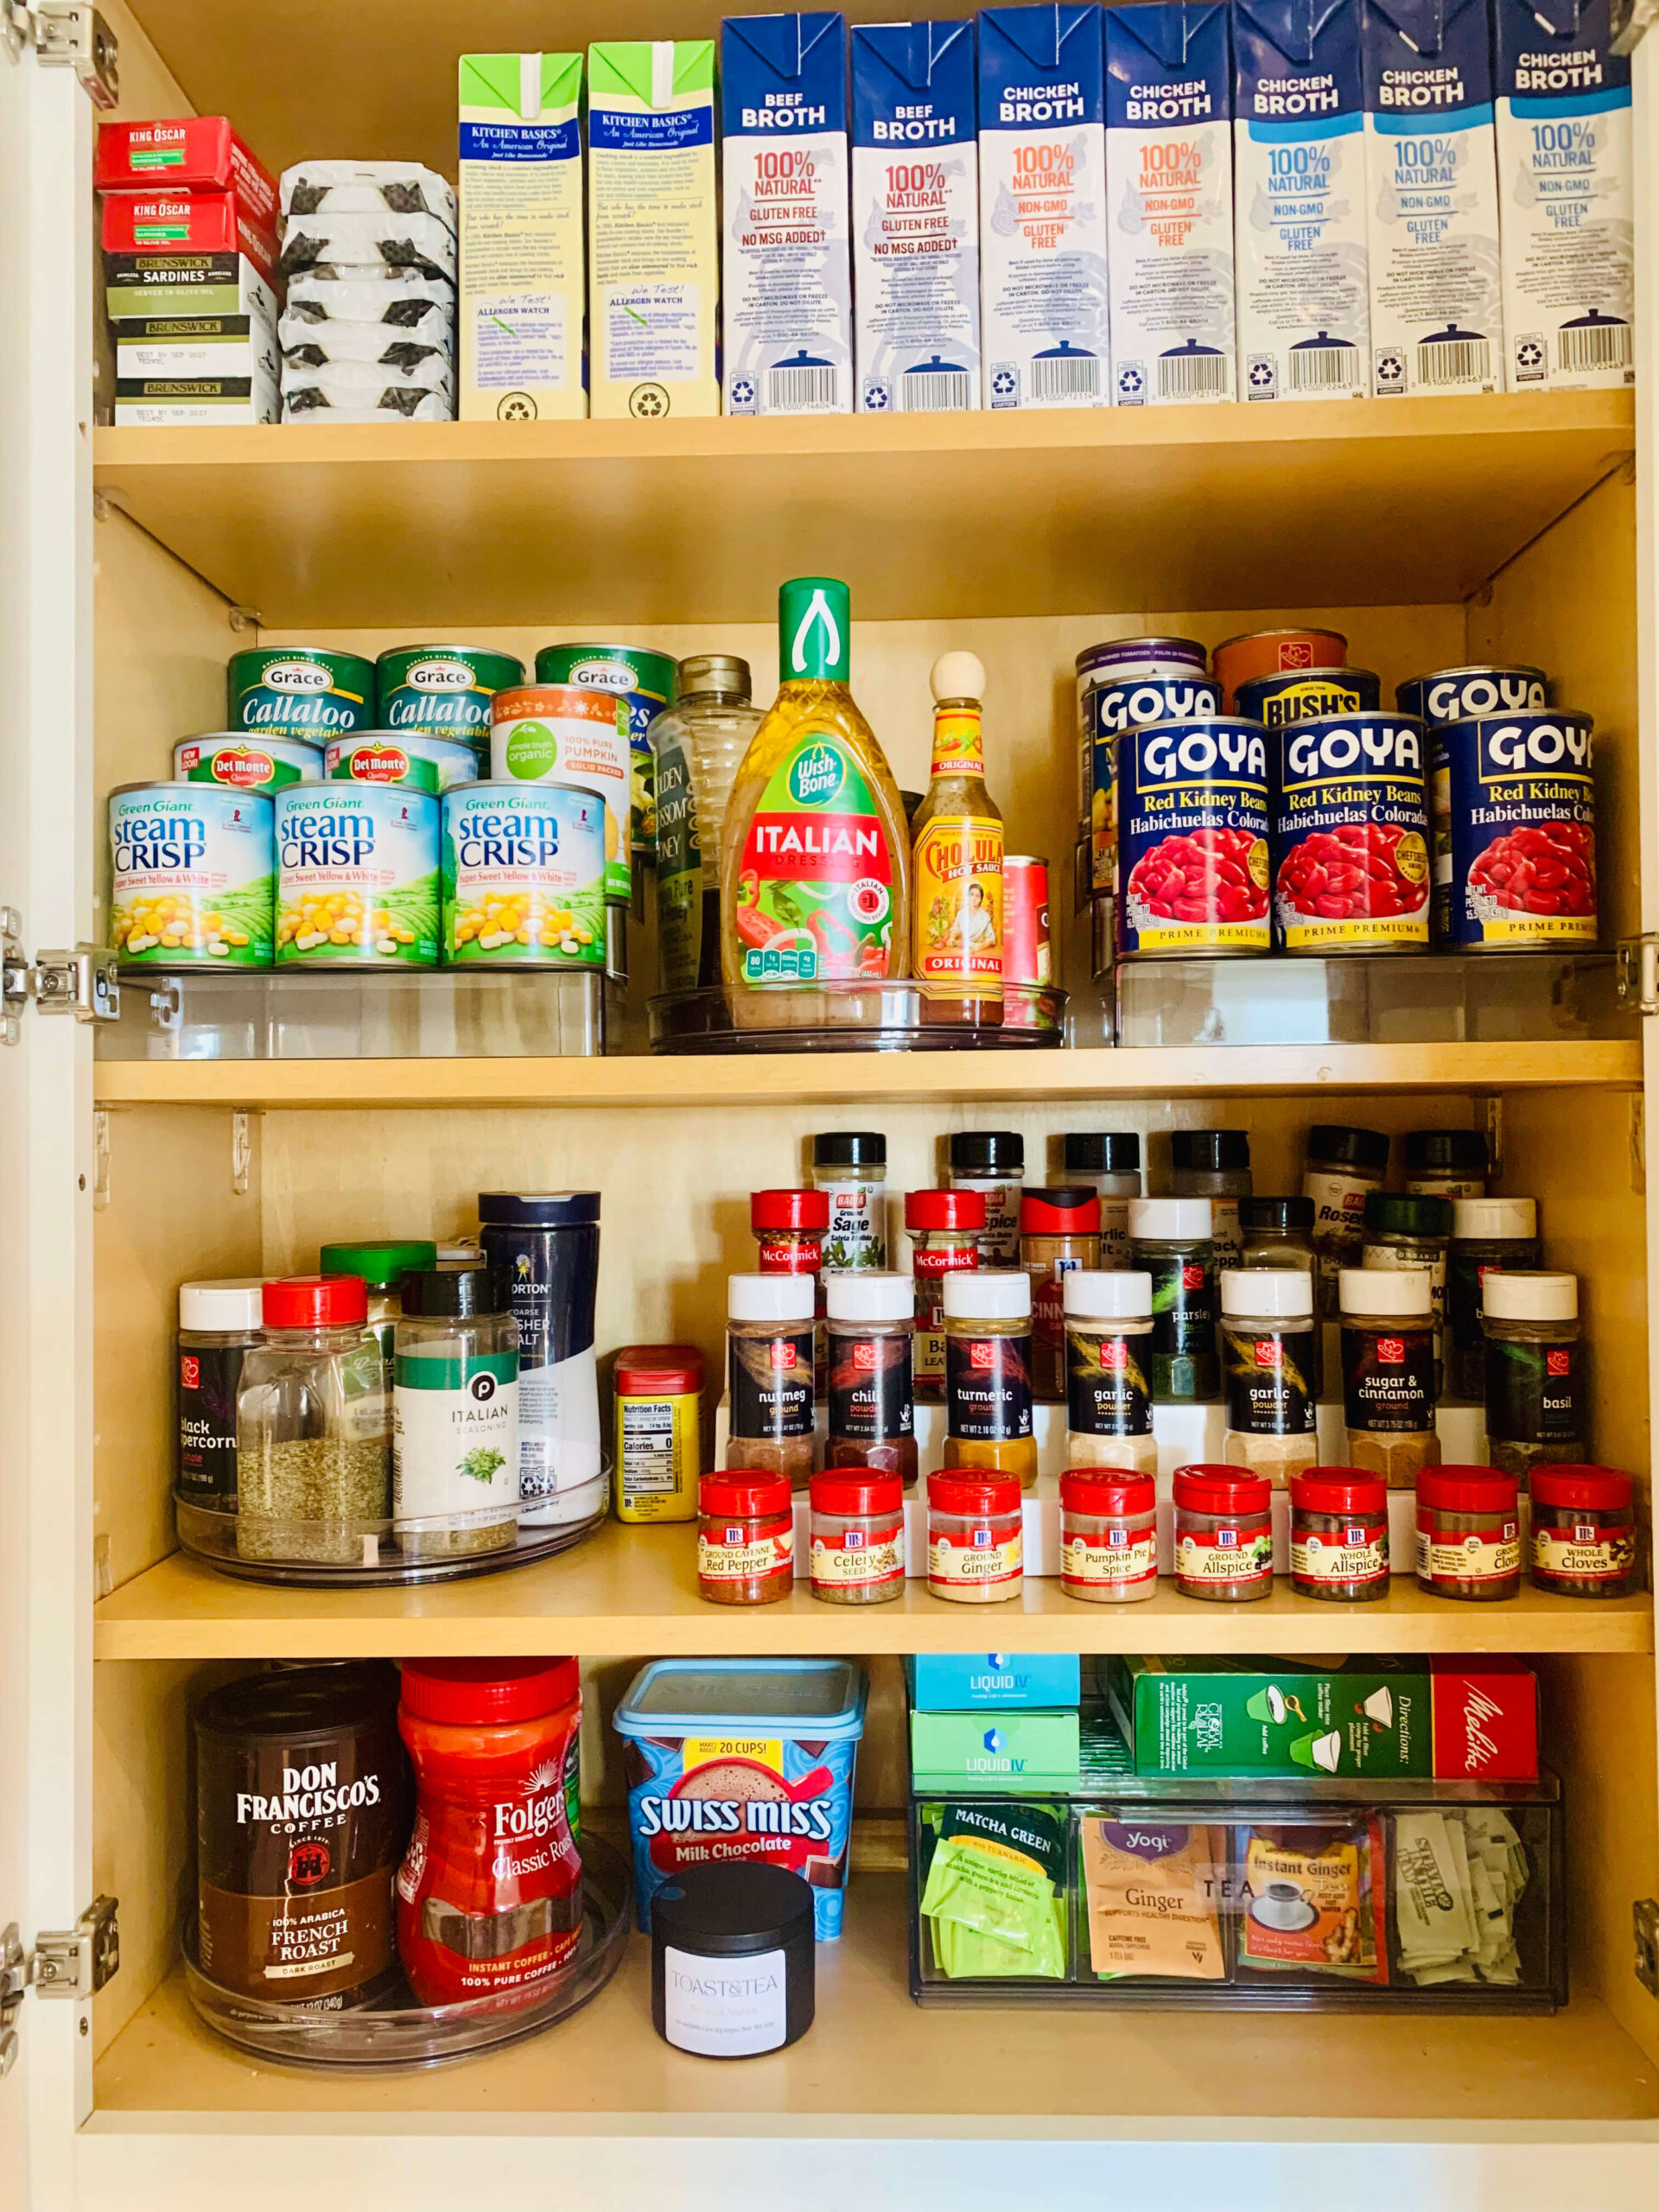 5 Storage Bins perfect for Organizing a Small Pantry — Rescue My Space, Professional Organizer & Declutterer